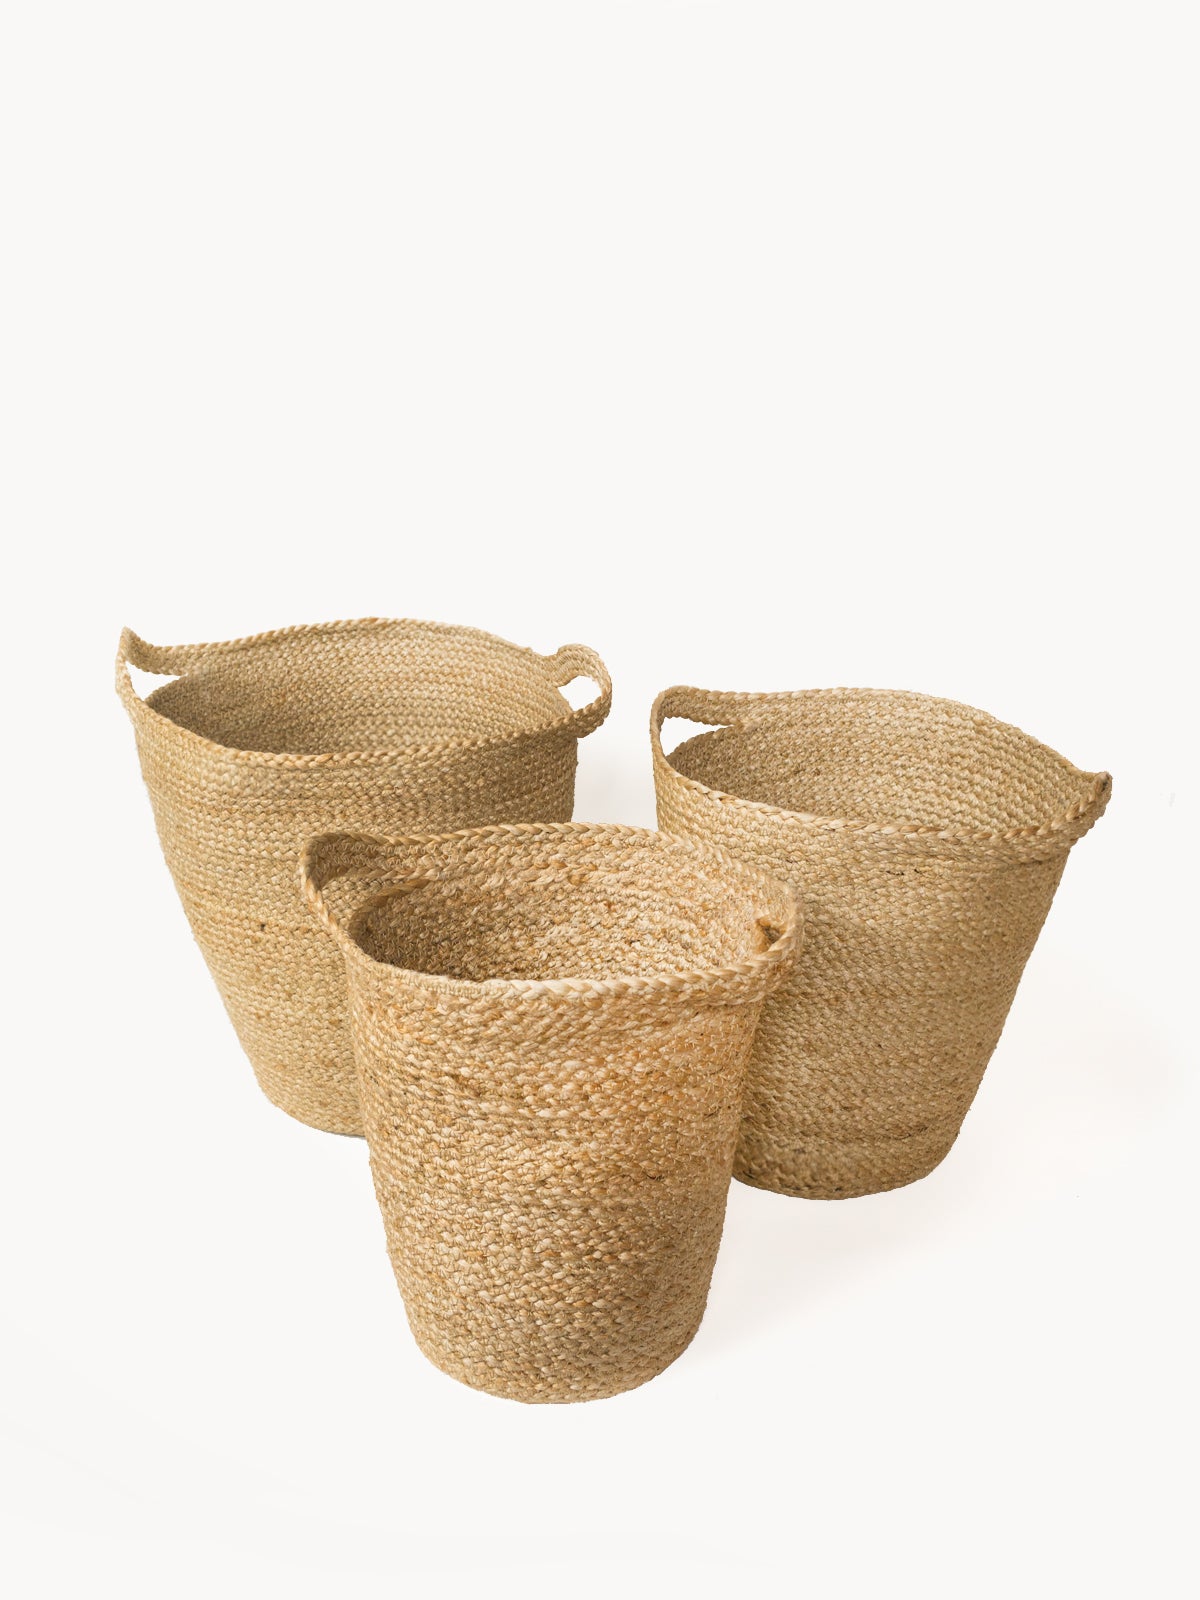 A multifunctional basket set! These handwoven baskets are perfect planters or storage for blankets, magazines, and everything more.